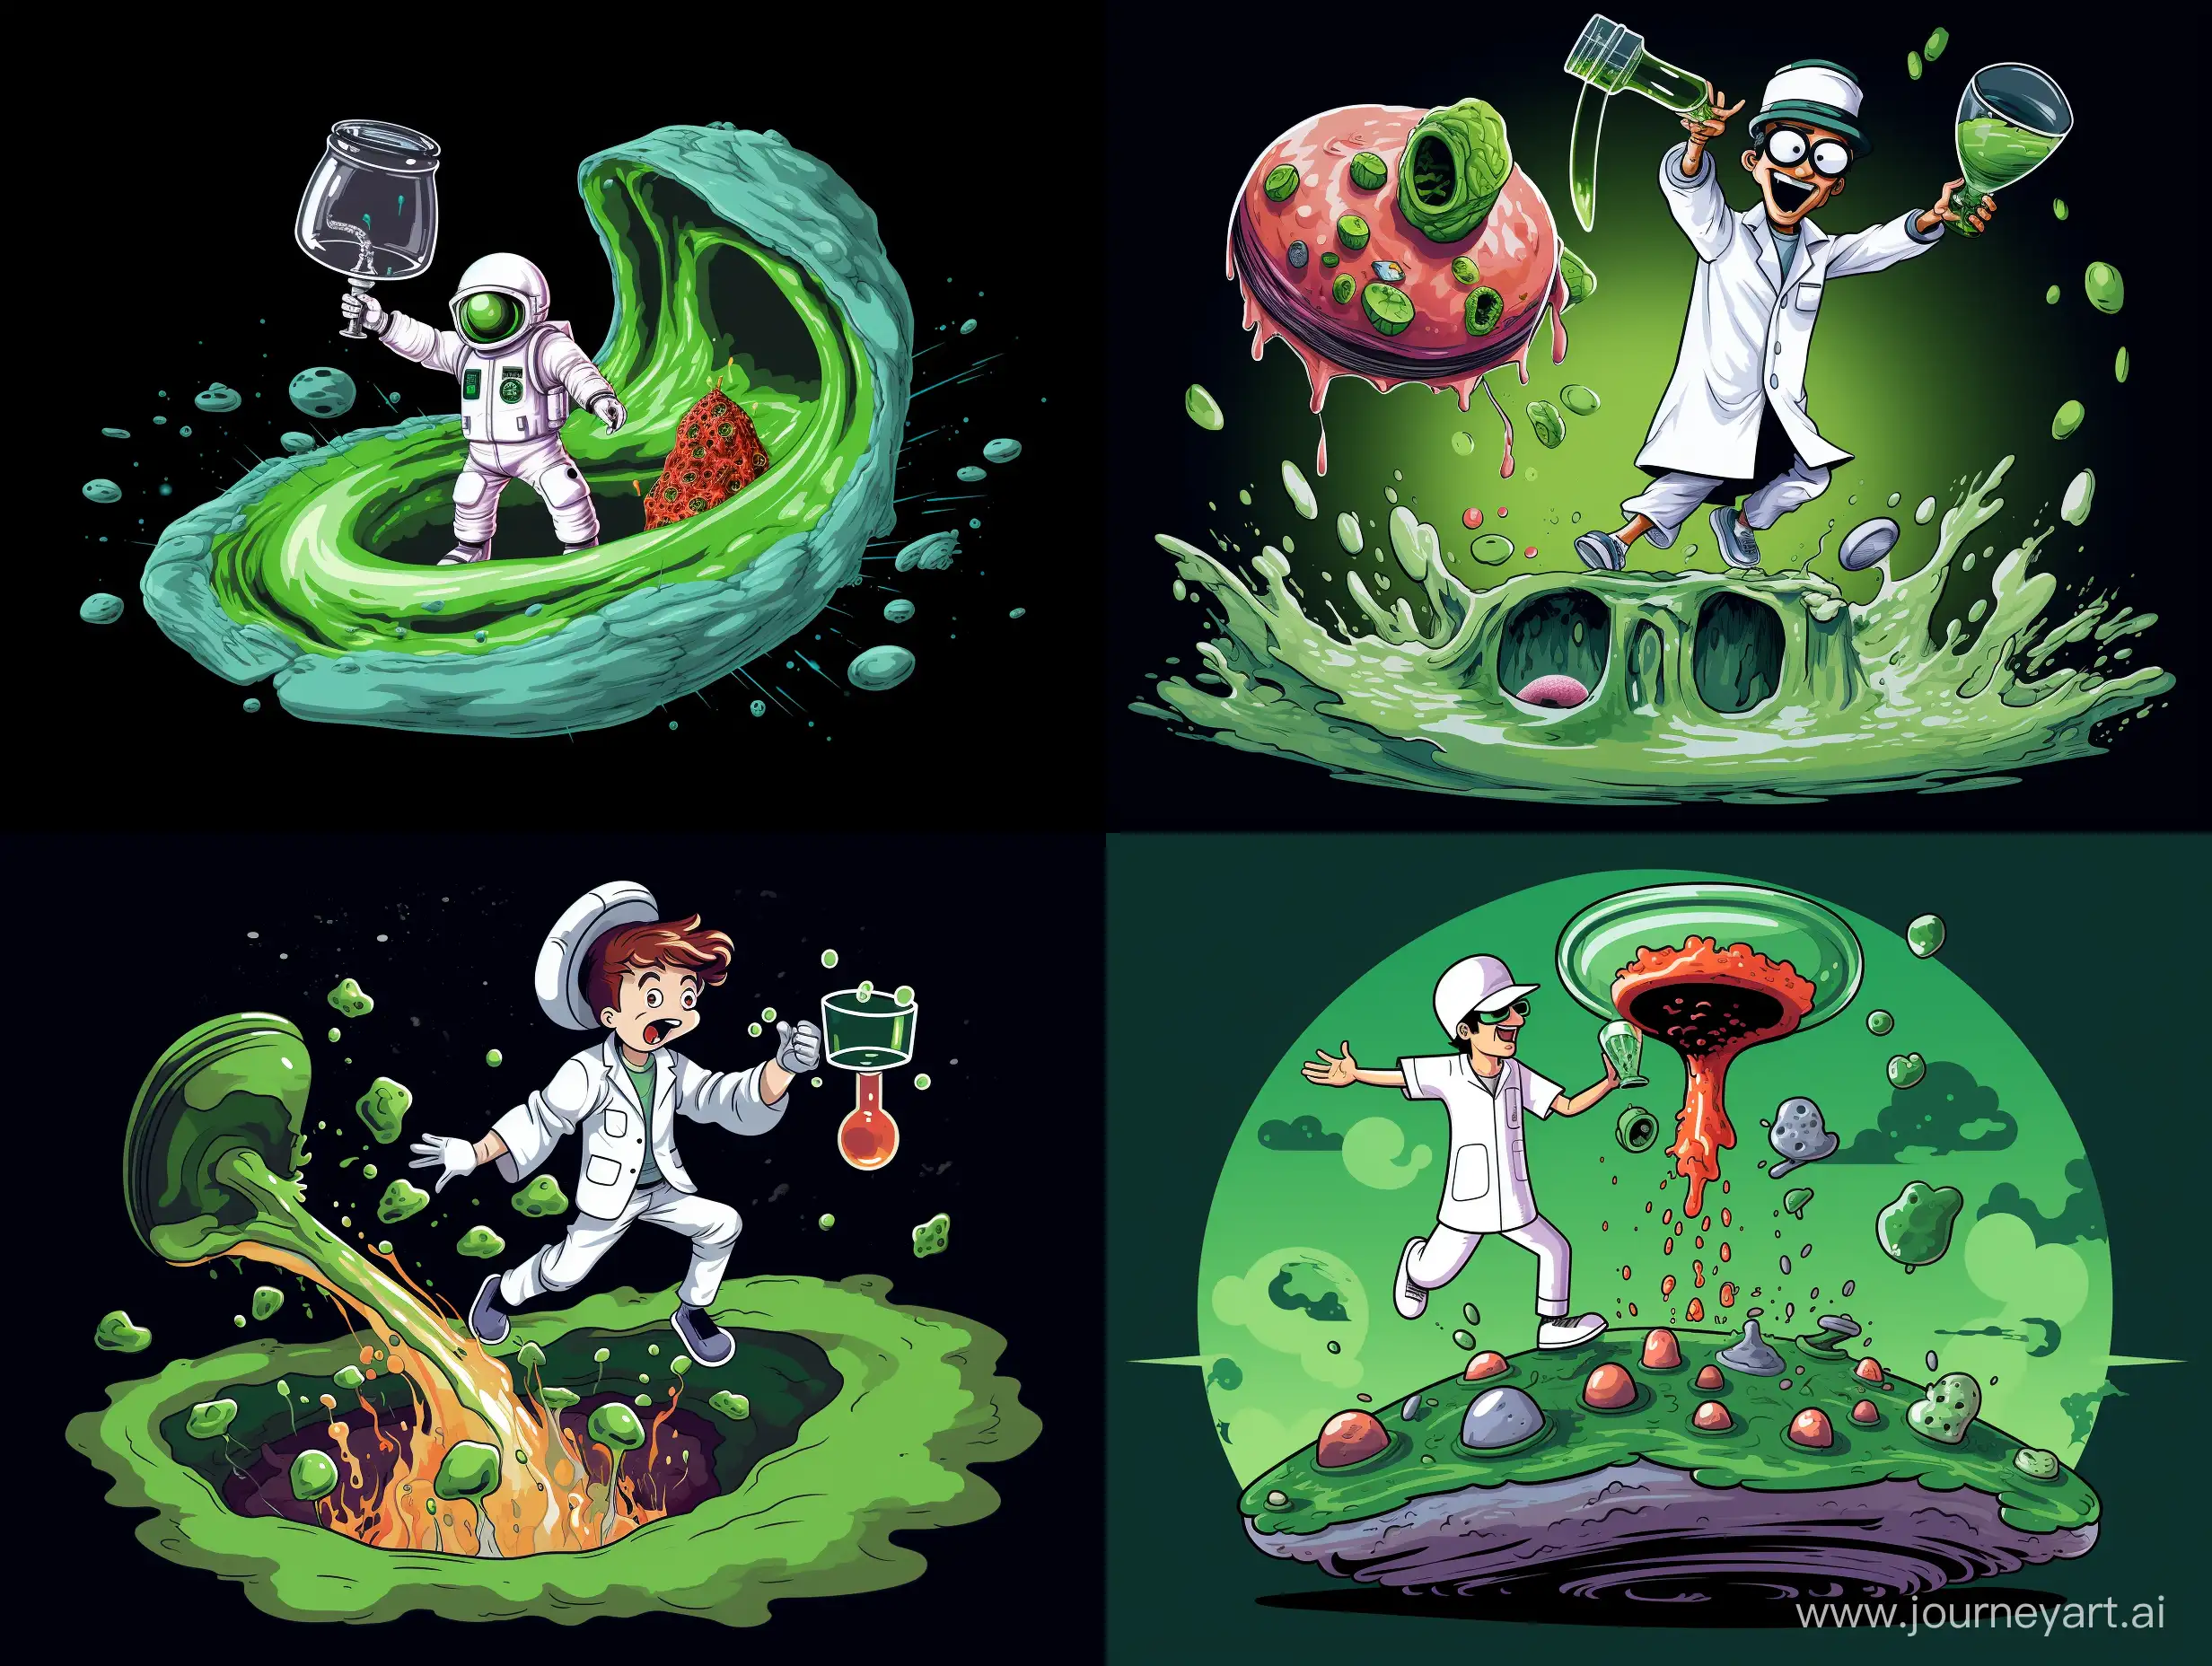 Picture a chemist wearing a lab coat, a T-shirt with a mushroom on it, baggy hip-hop jeans, and an astronaut helmet. While willingly falling headlong into a huge black hole that opens into a wormhole. He holds a flask half-filled with a green liquid in one hand and a half-eaten psilocybin mushroom in the other.